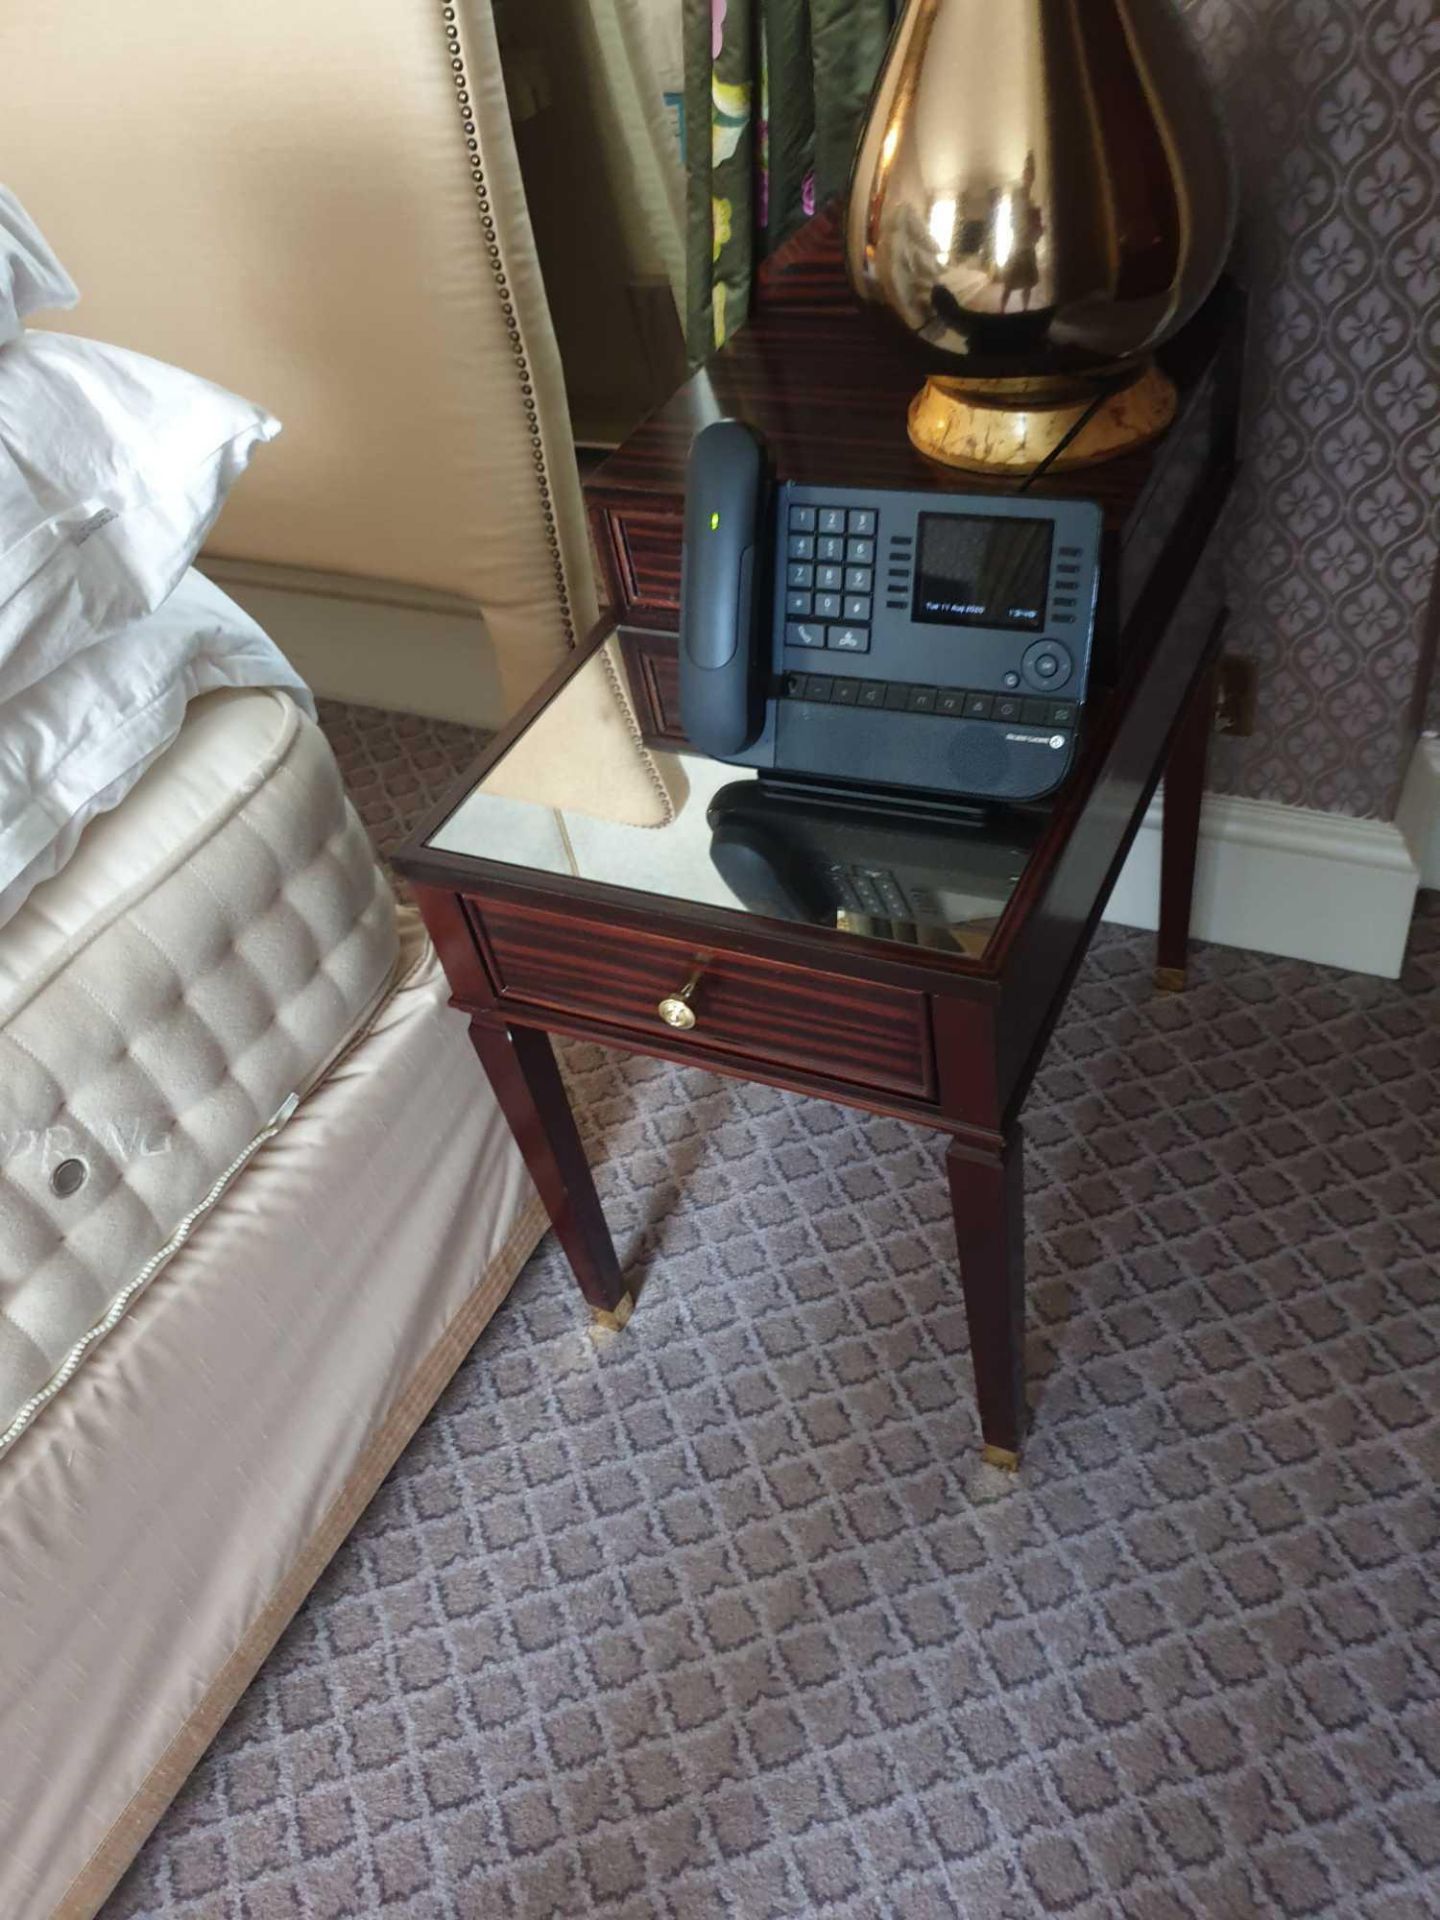 A Pair Of Two Tier Bedside Nightstands With Antiqued Plate Top With Storage Compartments Mounted - Image 2 of 2